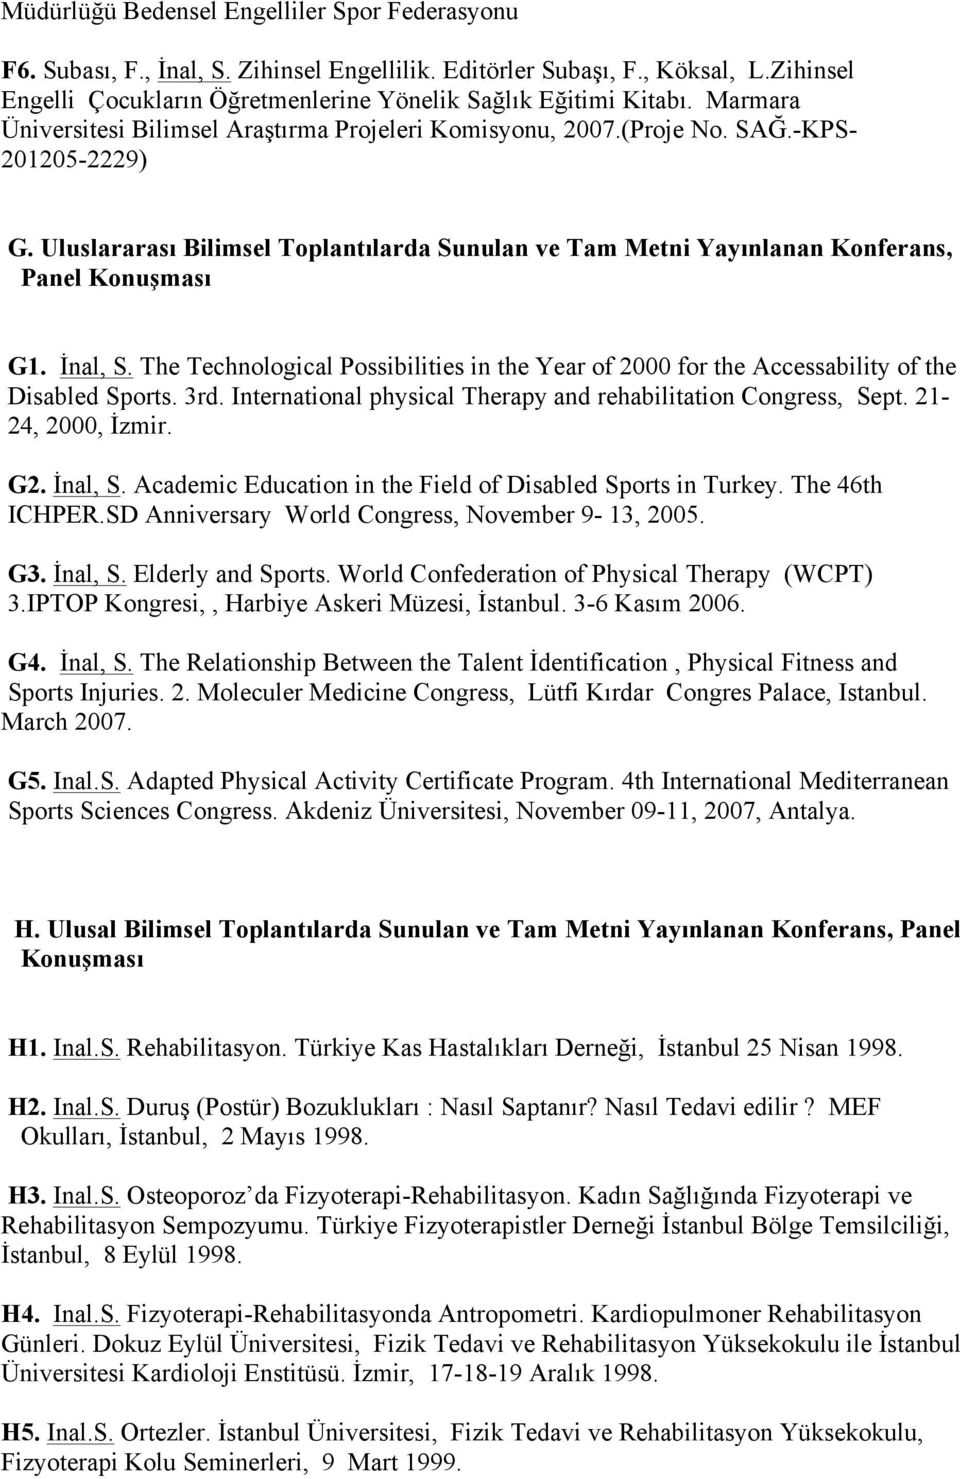 İnal, S. The Technological Possibilities in the Year of 000 for the Accessability of the Disabled Sports. 3rd. International physical Therapy and rehabilitation Congress, Sept. 1 4, 000, İzmir. G.